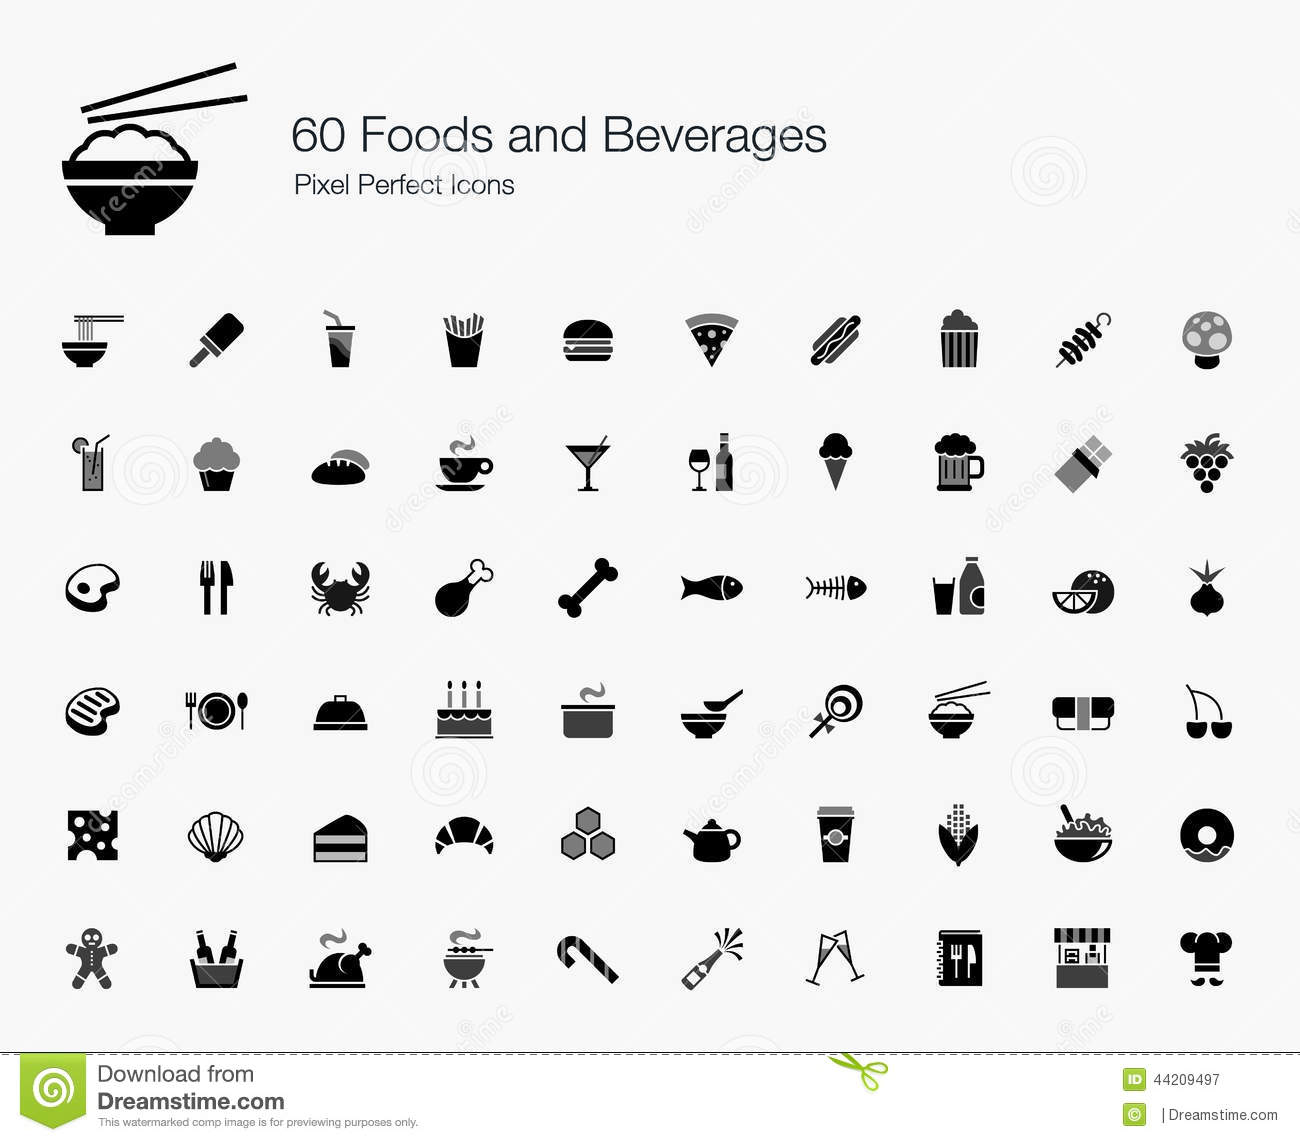 Icon for Food & Beverage Manufacturing